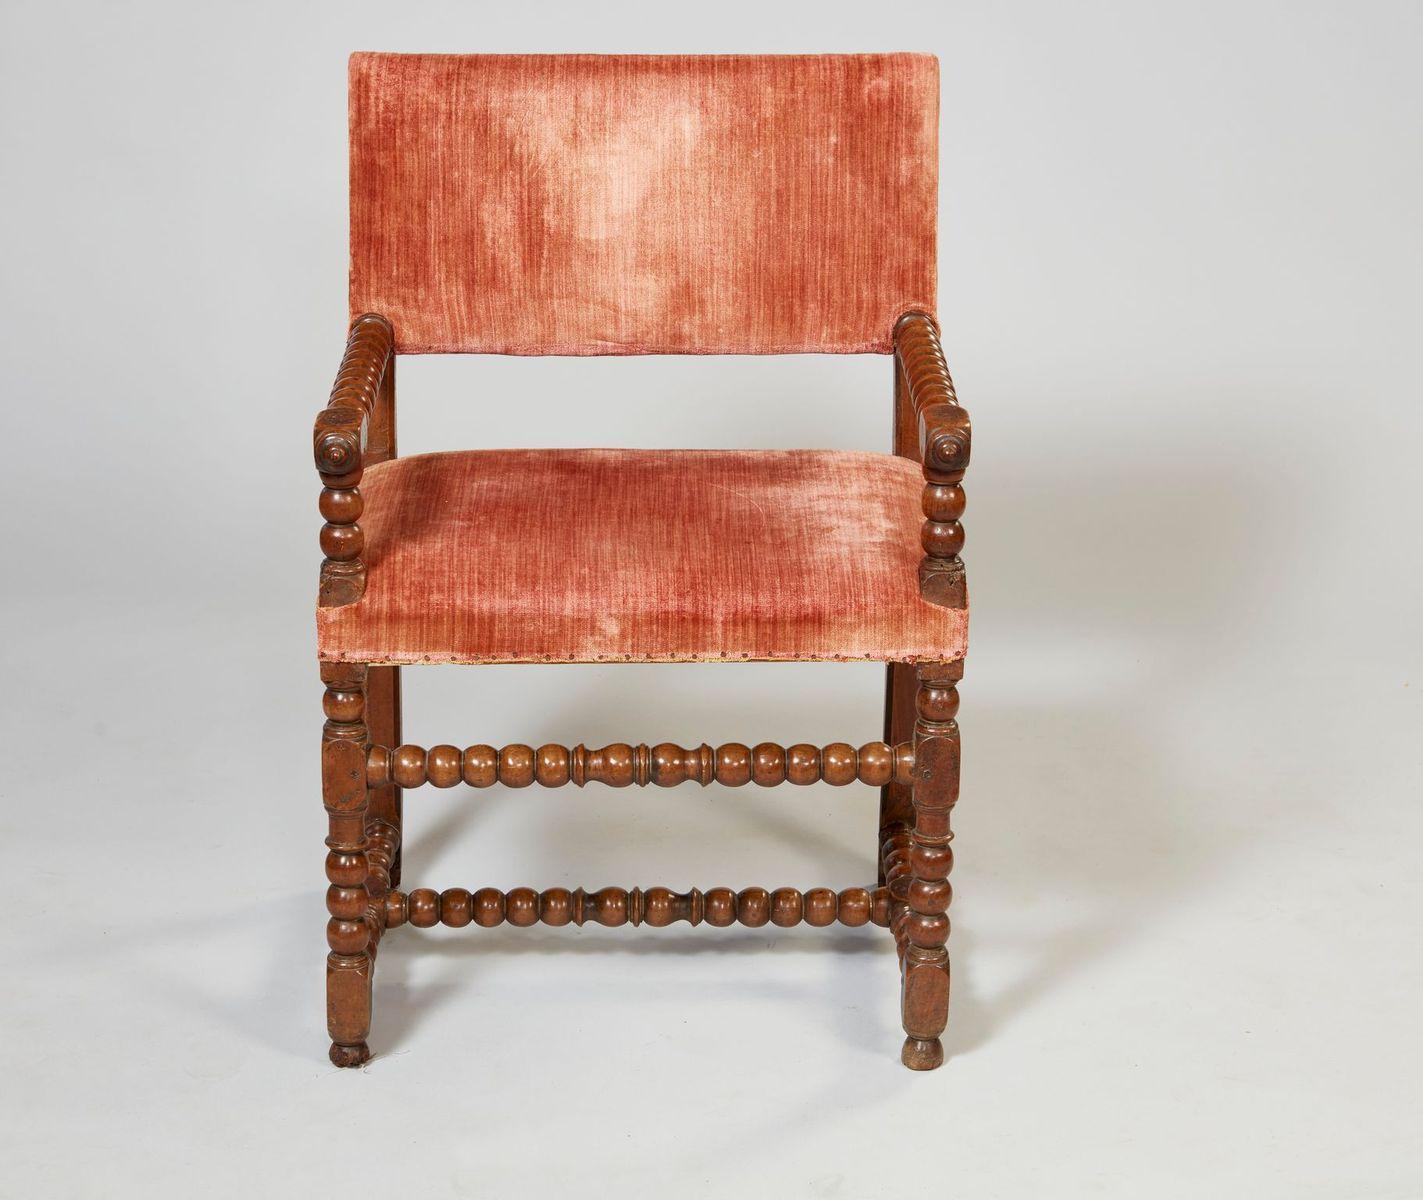 Late 17th century Italian walnut square back armchair with bobbin turned arms, legs and stretchers, the whole possessing good rich color and crisp turnings.